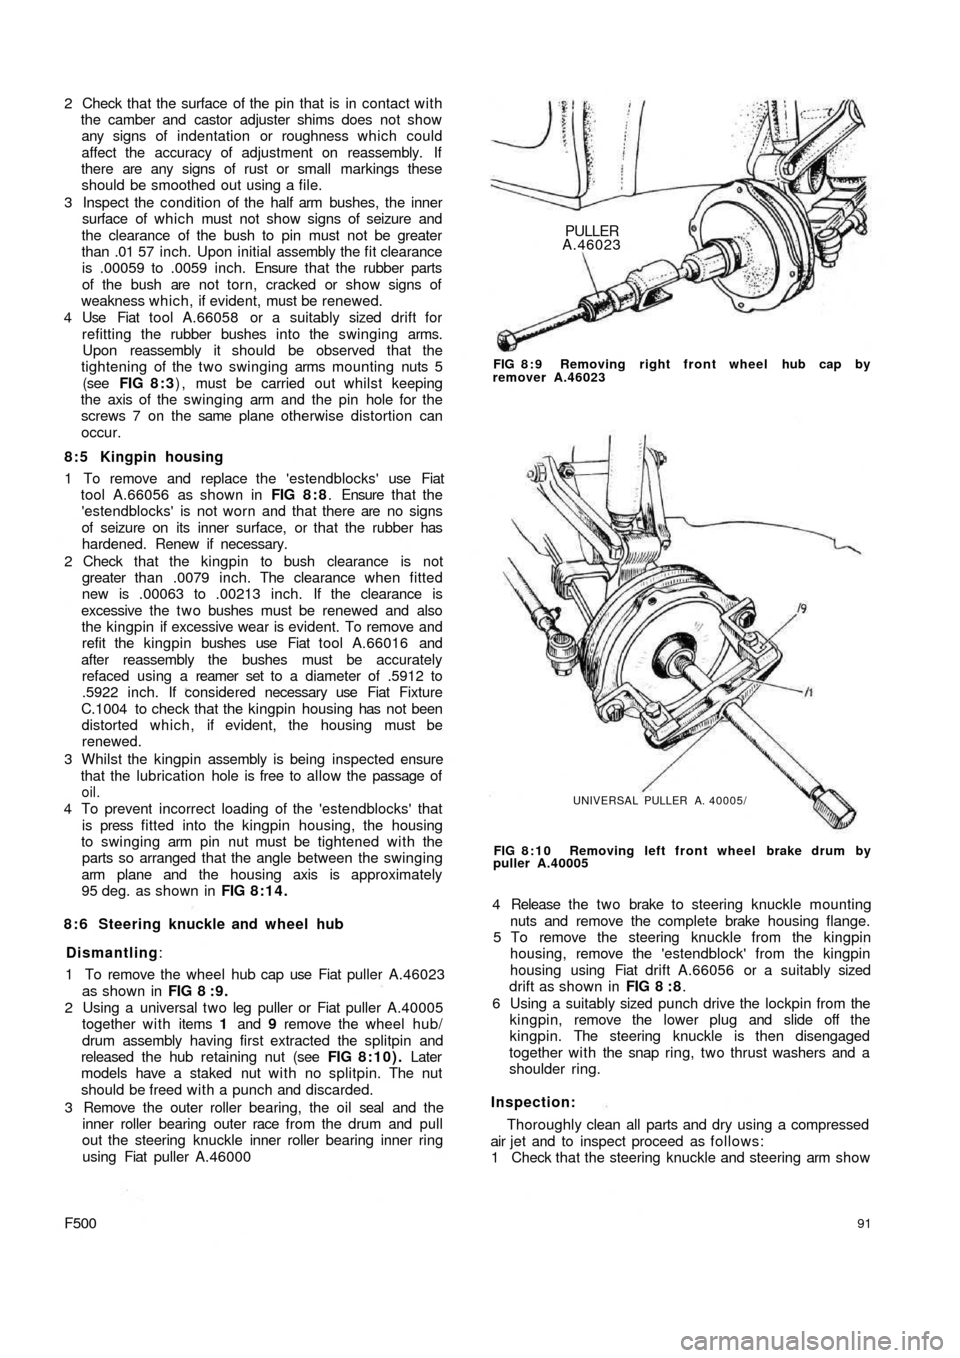 FIAT 500 1961 1.G Workshop Manual 2  Check that the surface of the pin that is in contact with
the camber and castor adjuster shims does not show
any signs of indentation or roughness which could
affect the  accuracy of adjustment on 